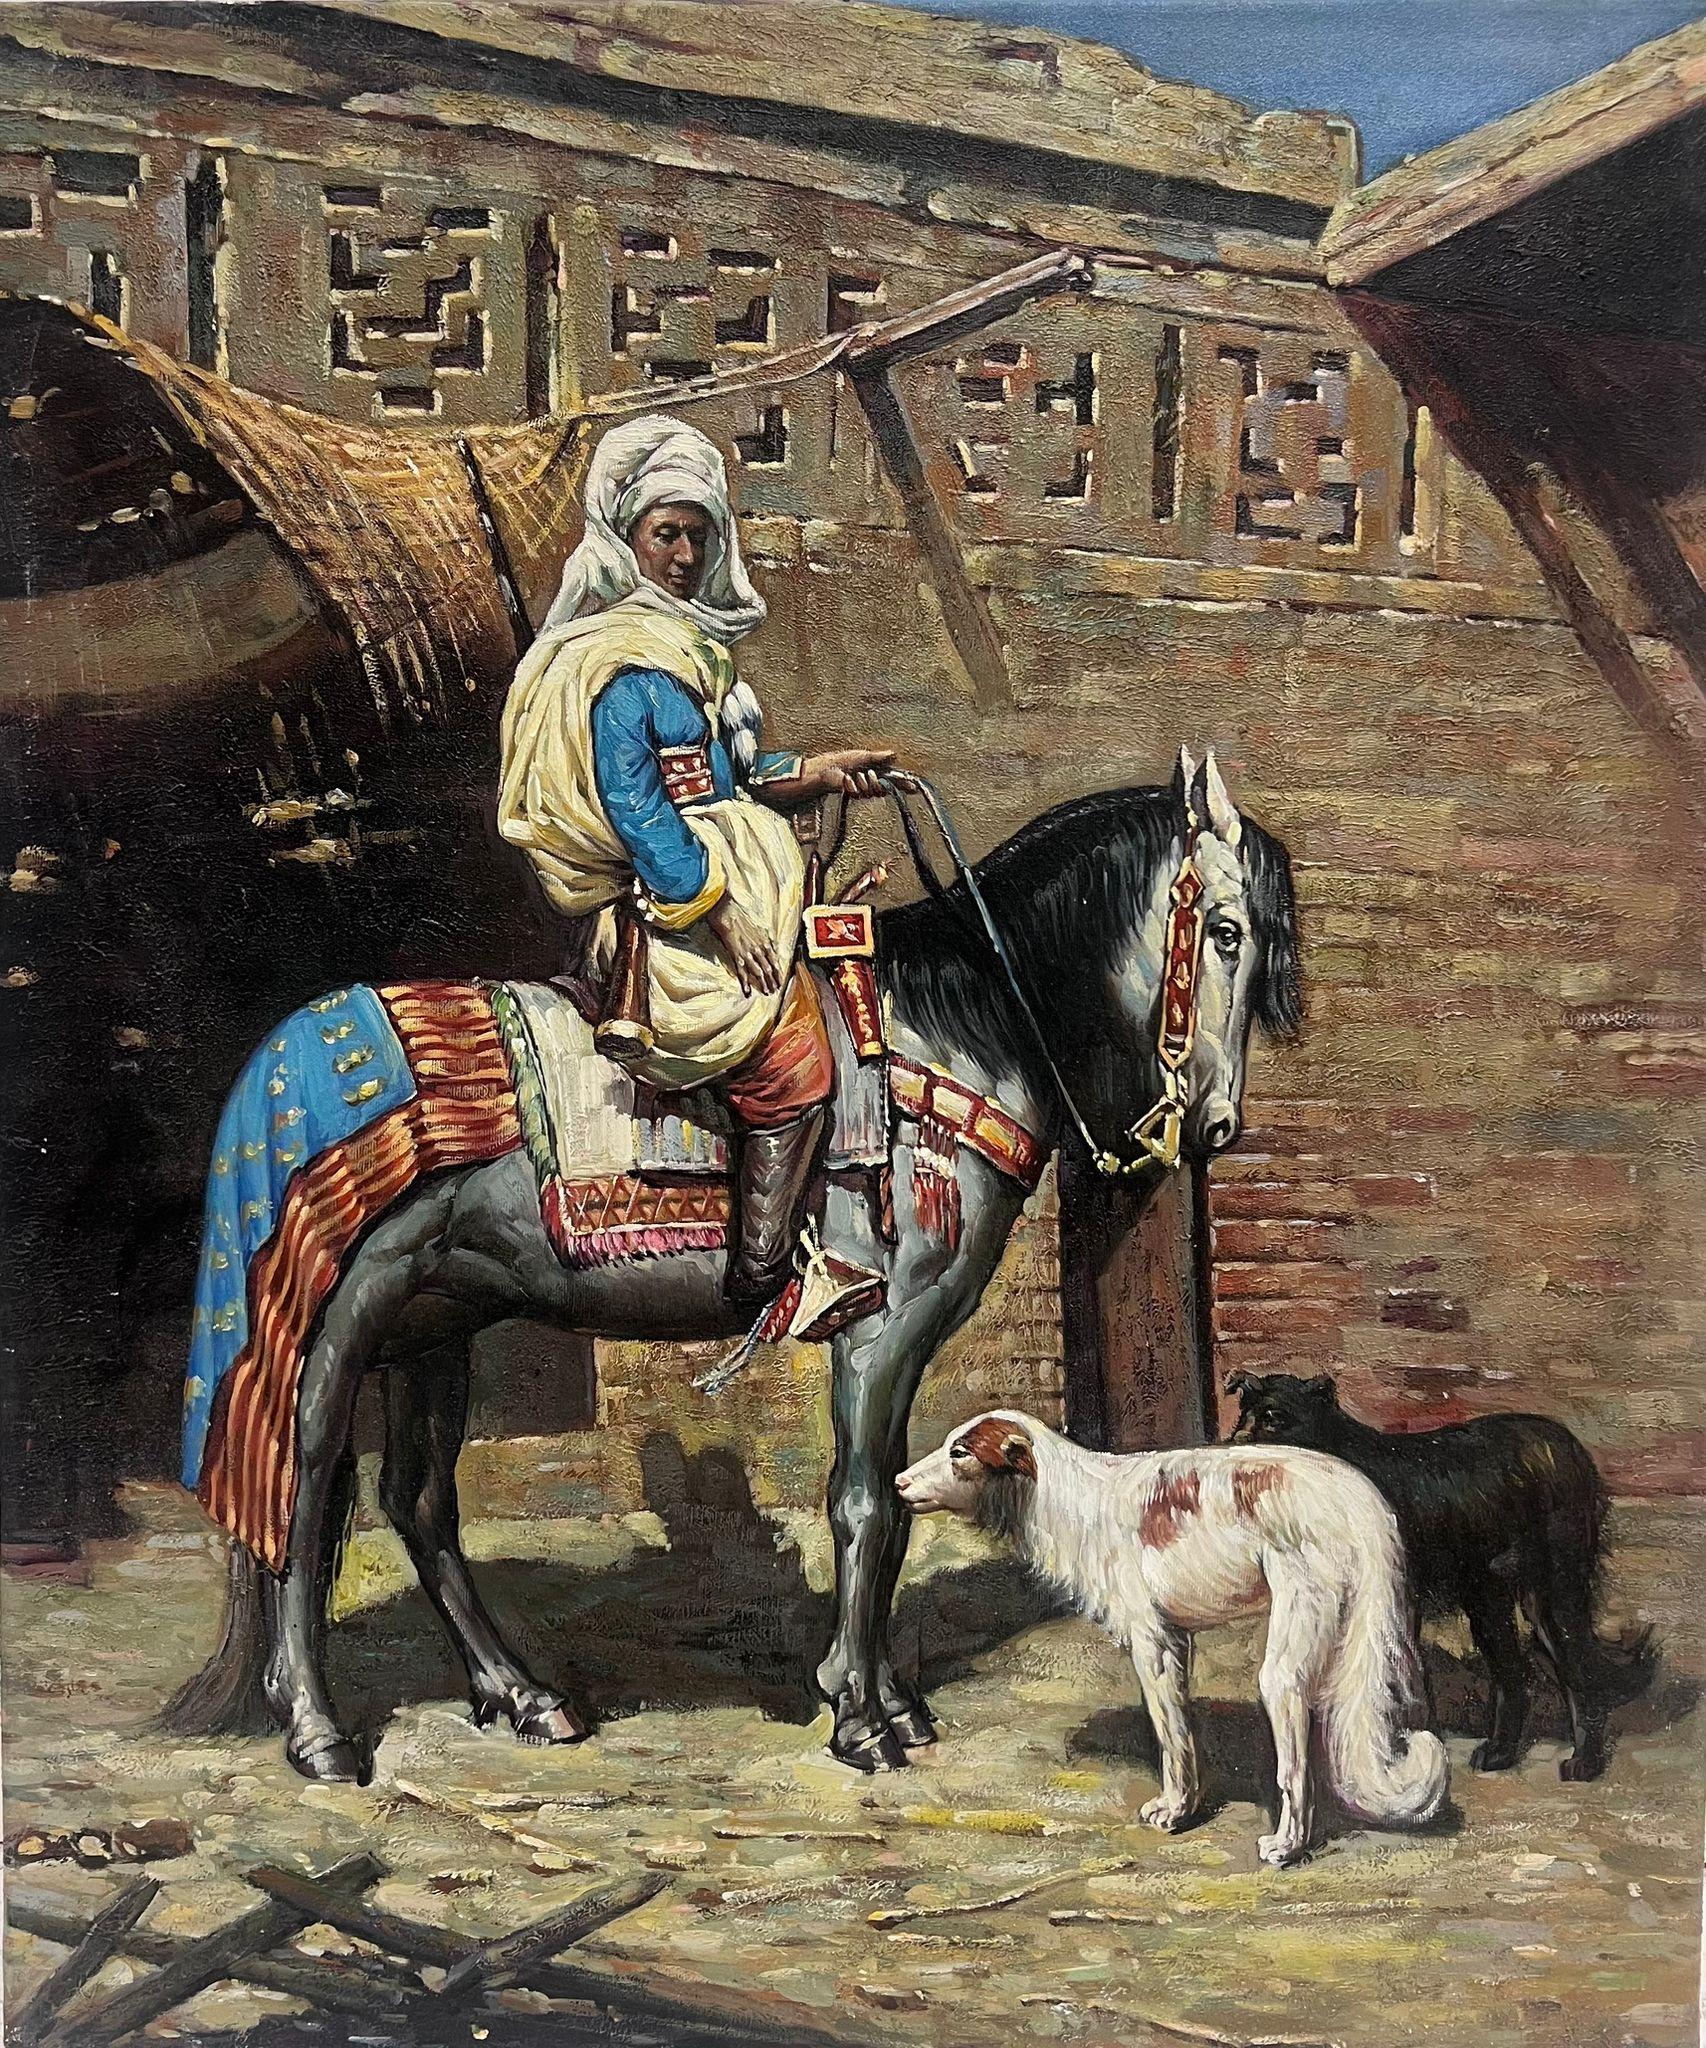 North African Orientalist Scene Man on Horseback with Dogs outside City Building